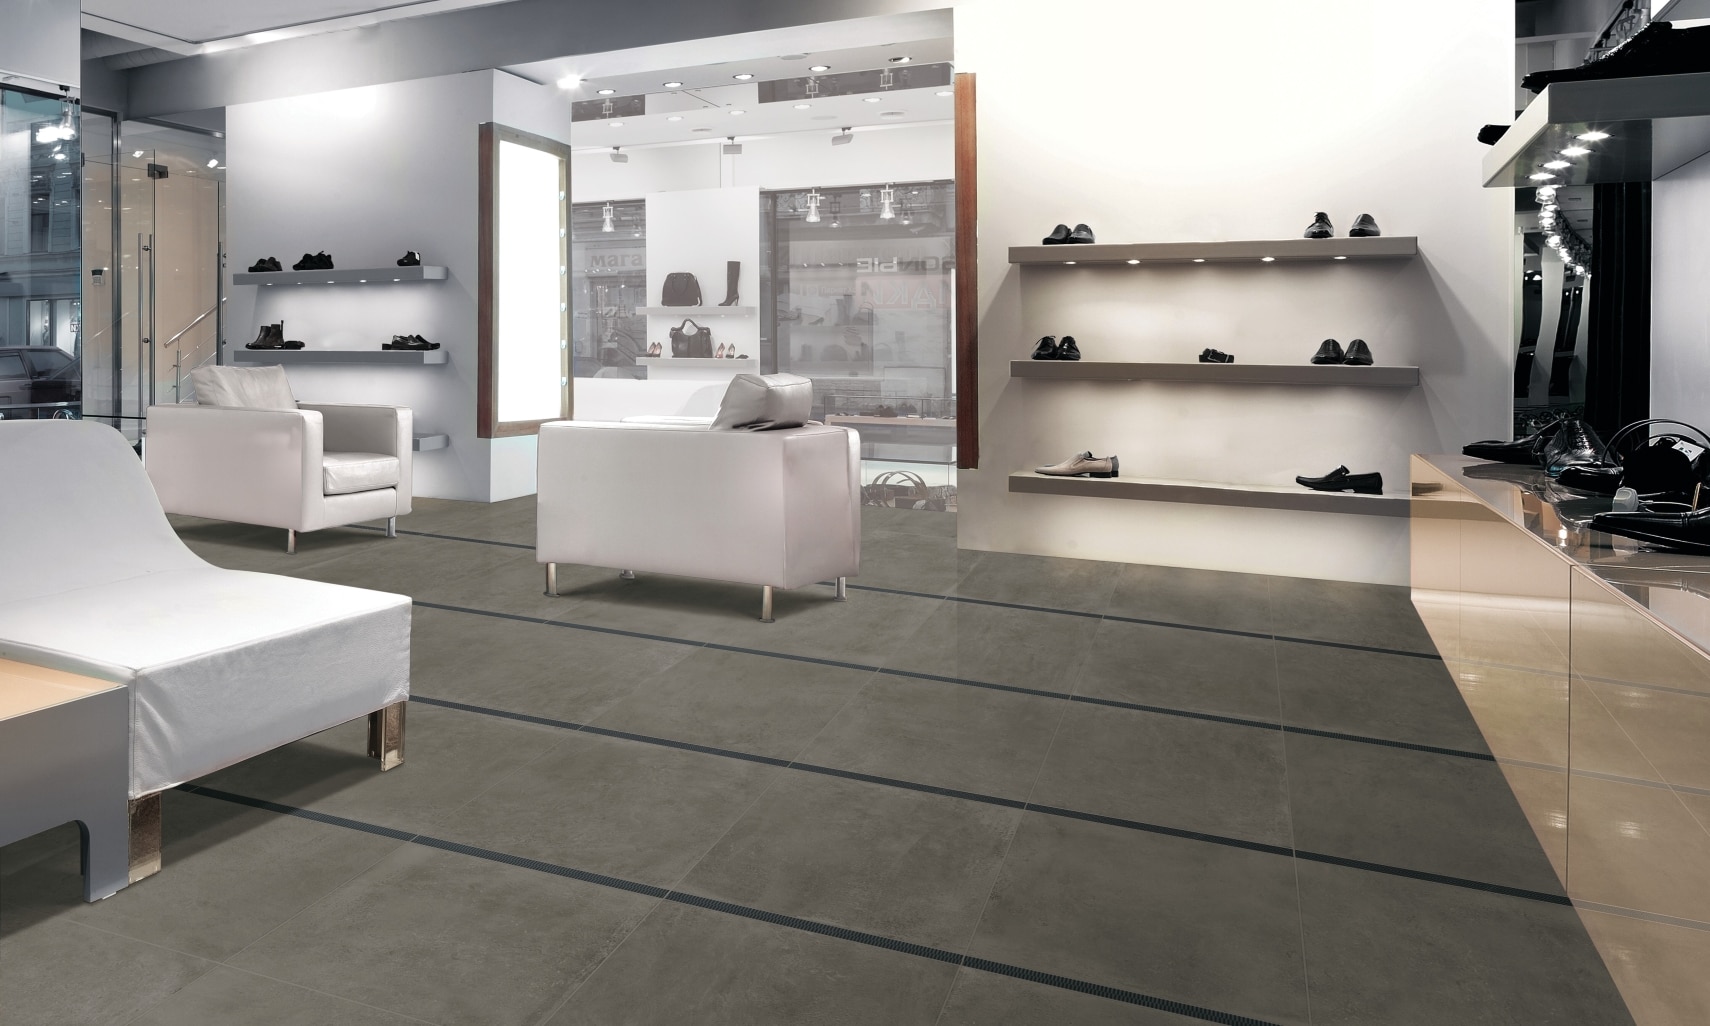 Luxury men’s shoe store with dark gray floor tile that looks like concrete, white leather chairs, and floating shelves holding shoes.